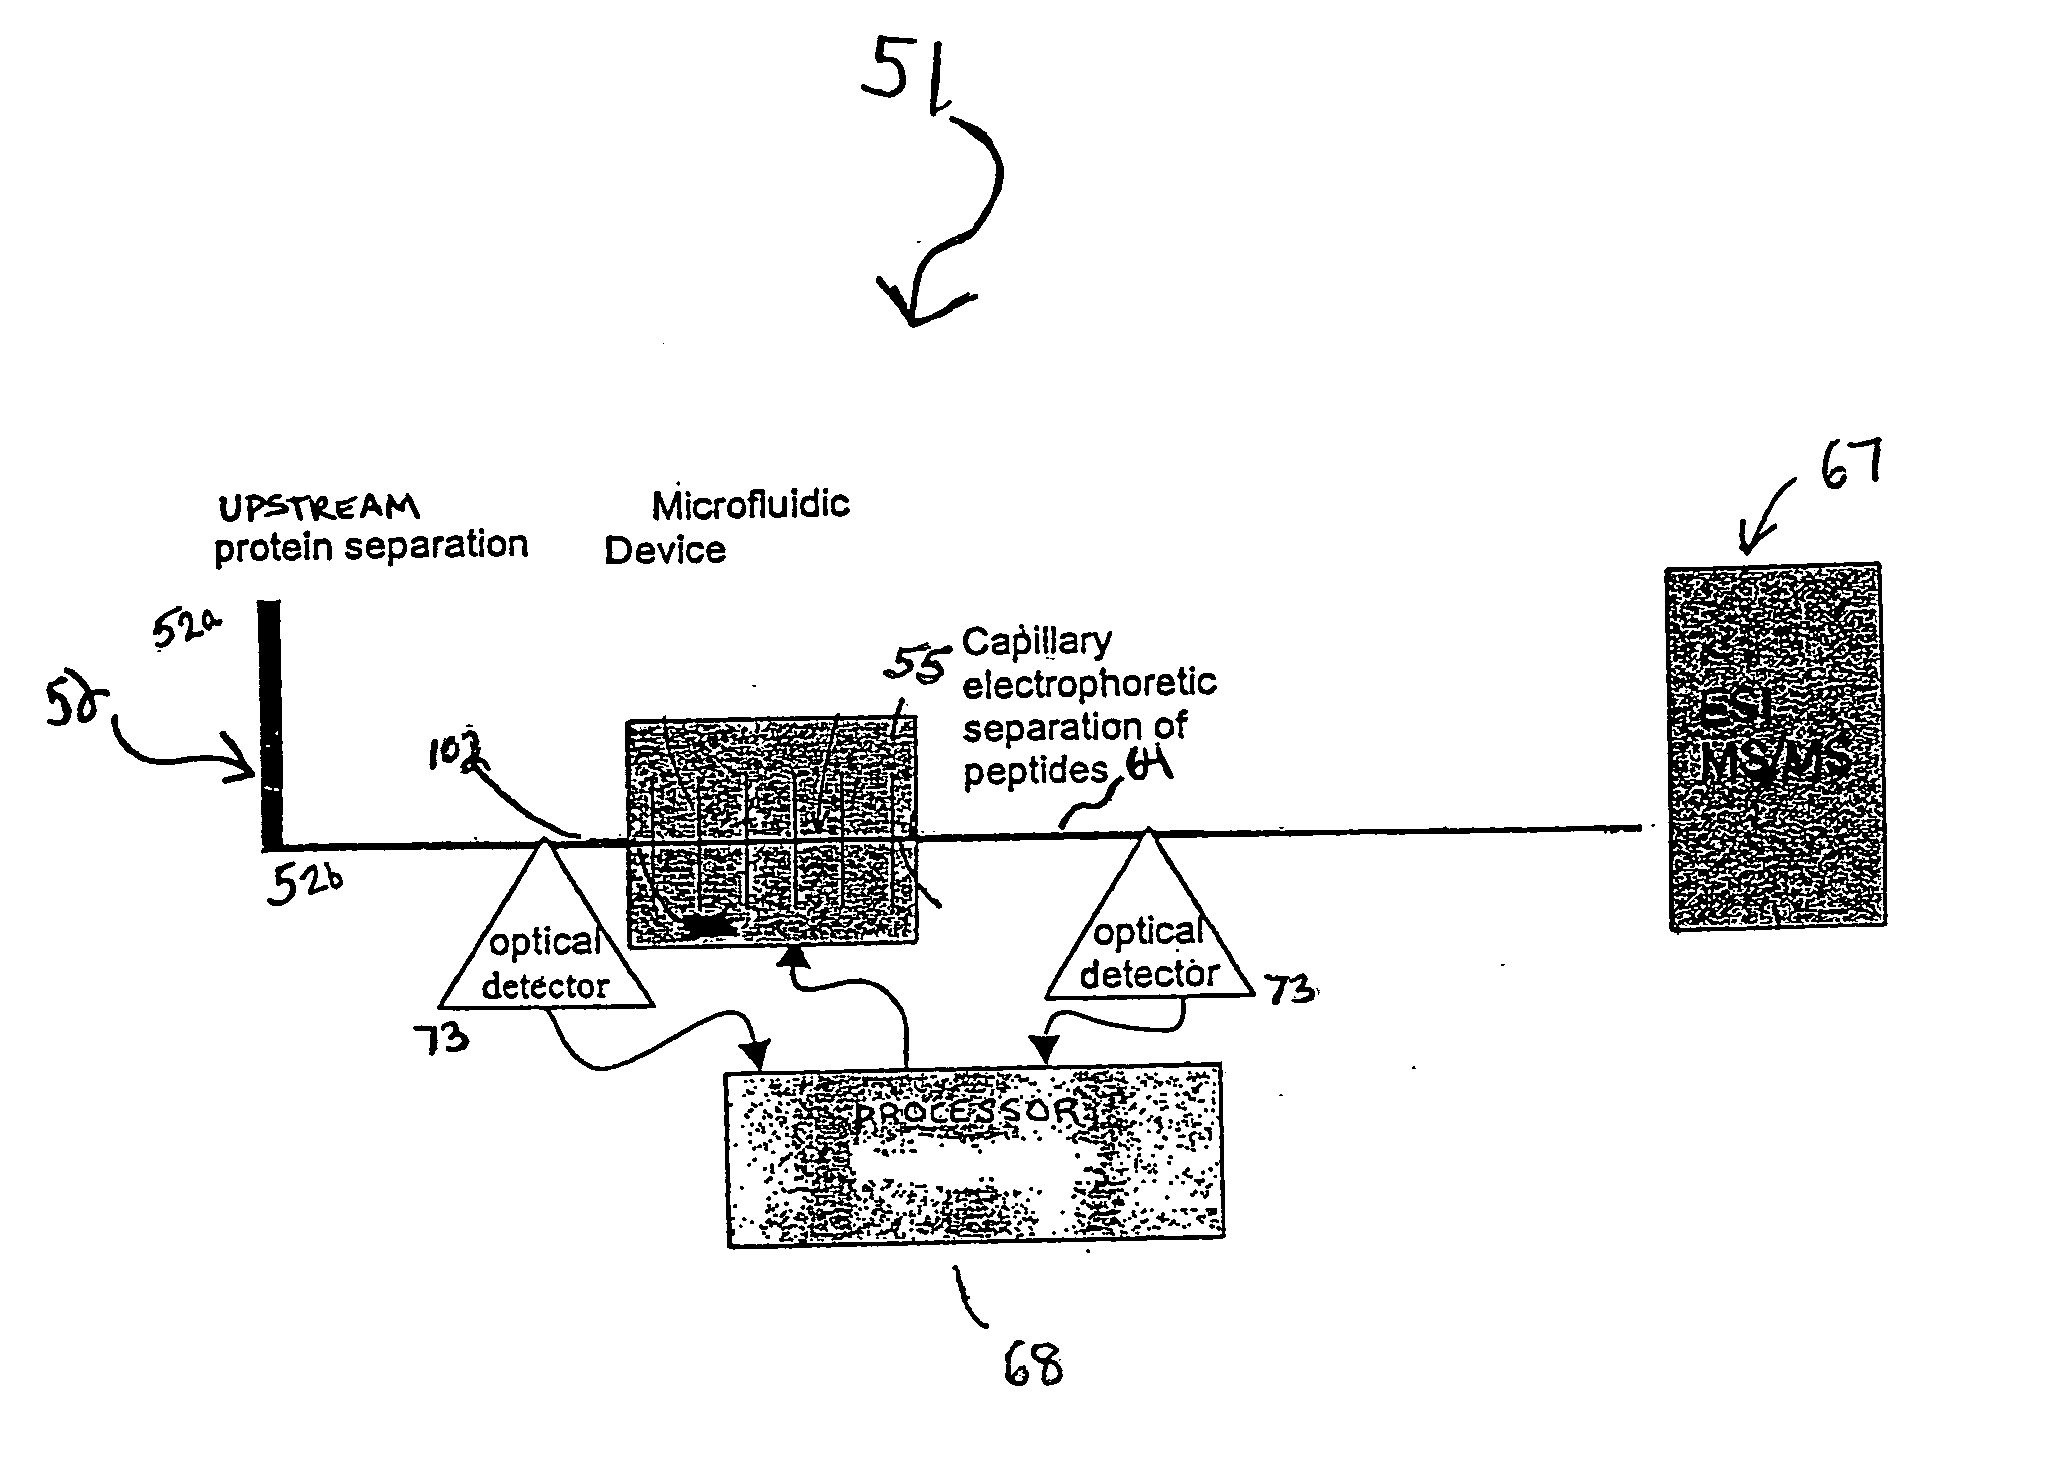 Apparatus and method for Edman degradation on a microfluidic device utilizing an electroosmotic flow pump